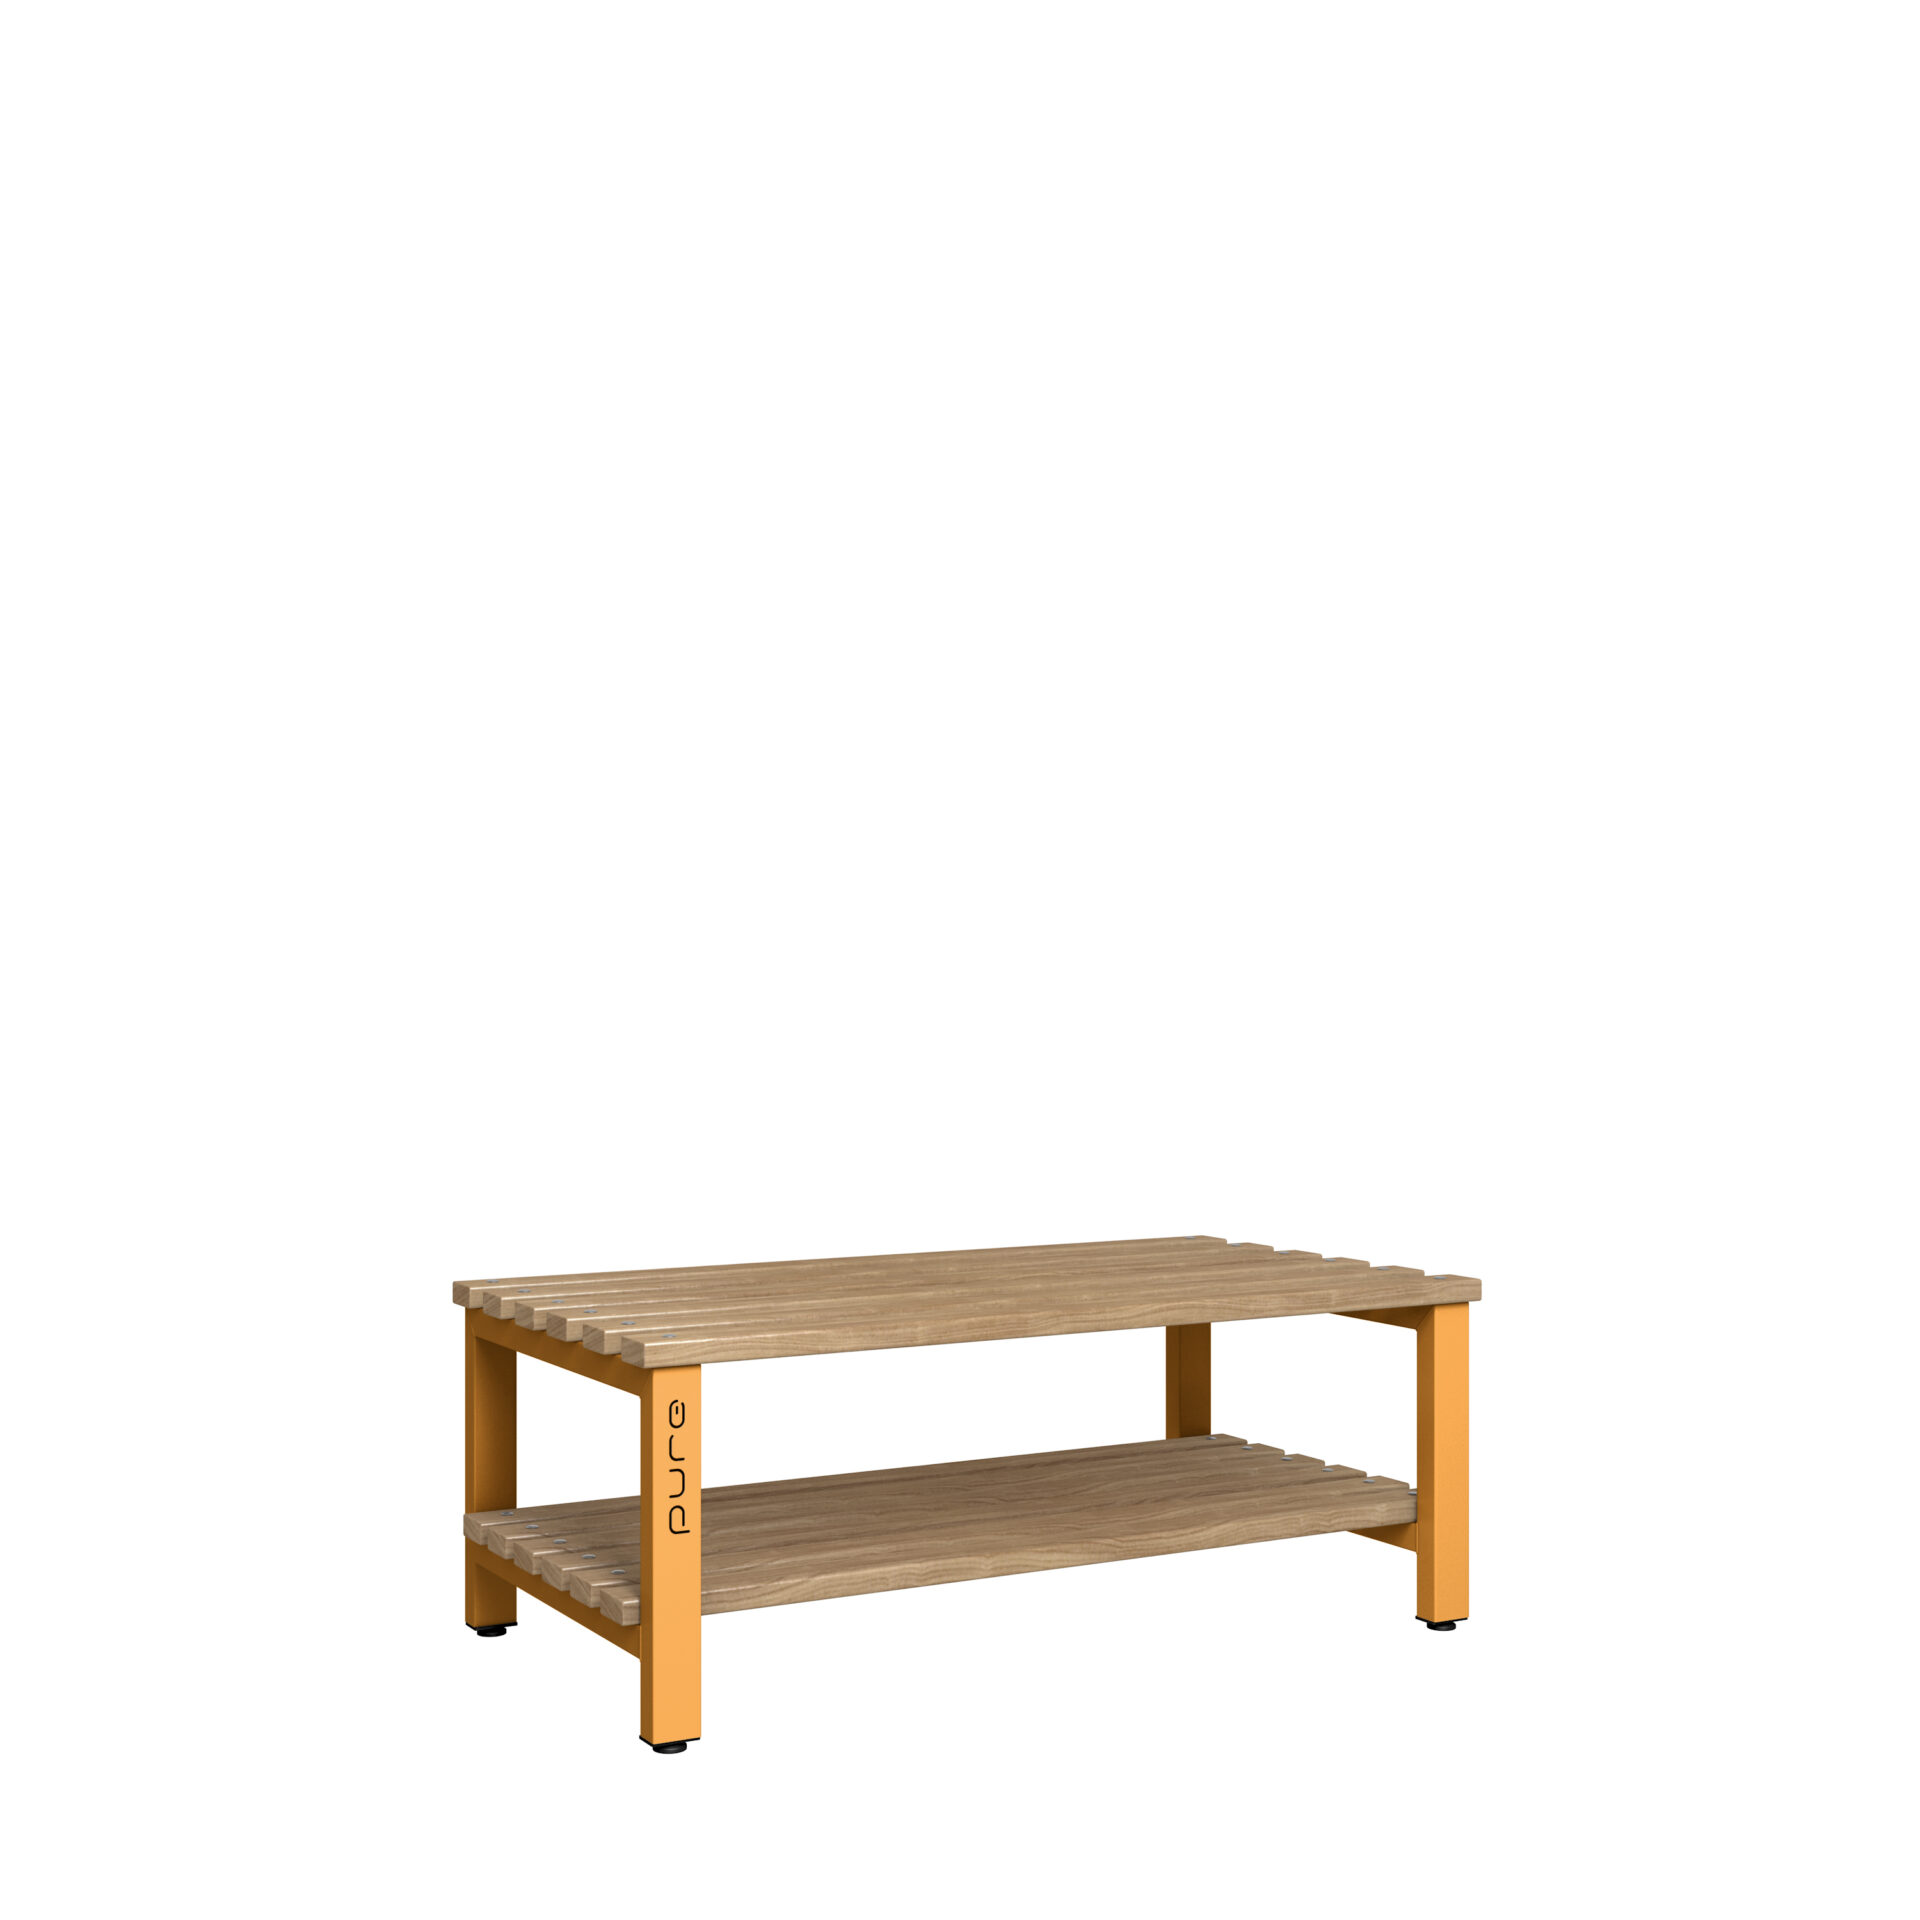 Pure Carbon Zero Double Sided 1200mm Standard Bench With Shoe Shelf - Magma Orange / Solid Timber